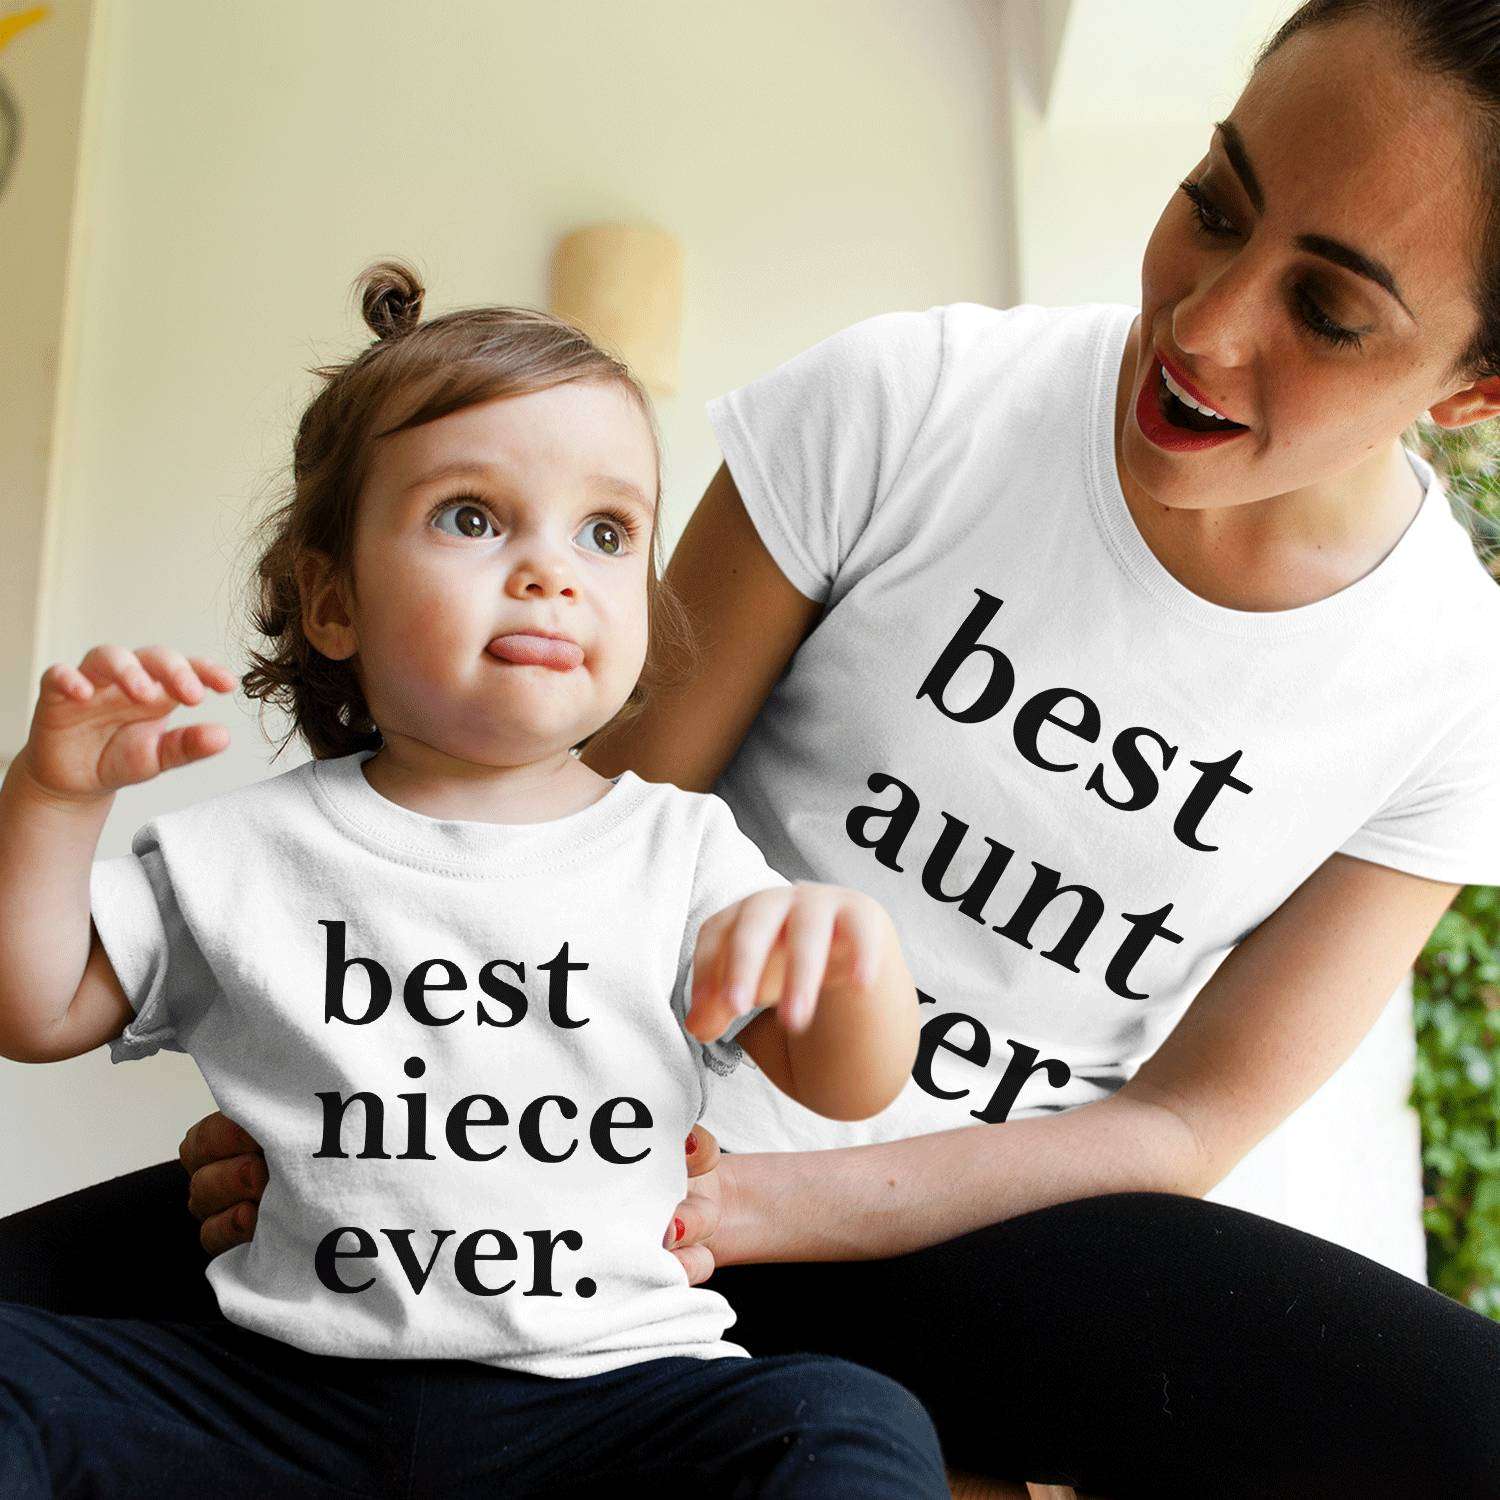 Best Aunt Ever Best Niece Ever, Aunt Niece Shirts, Matching Family Shirts. 